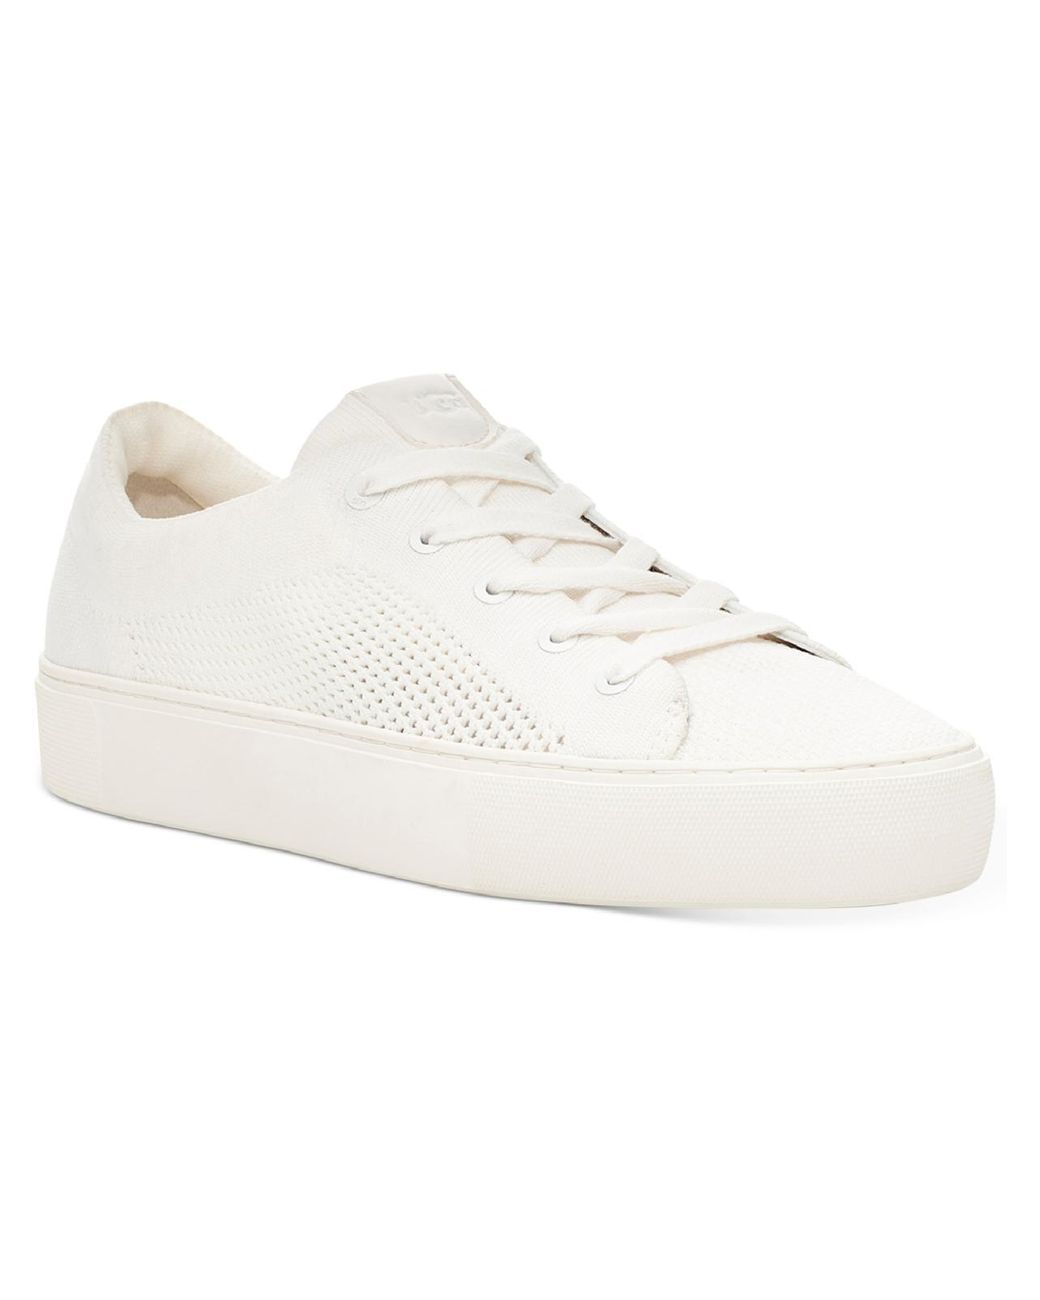 UGG Zilo Knit Lifestyle Fashion Sneakers in White | Lyst